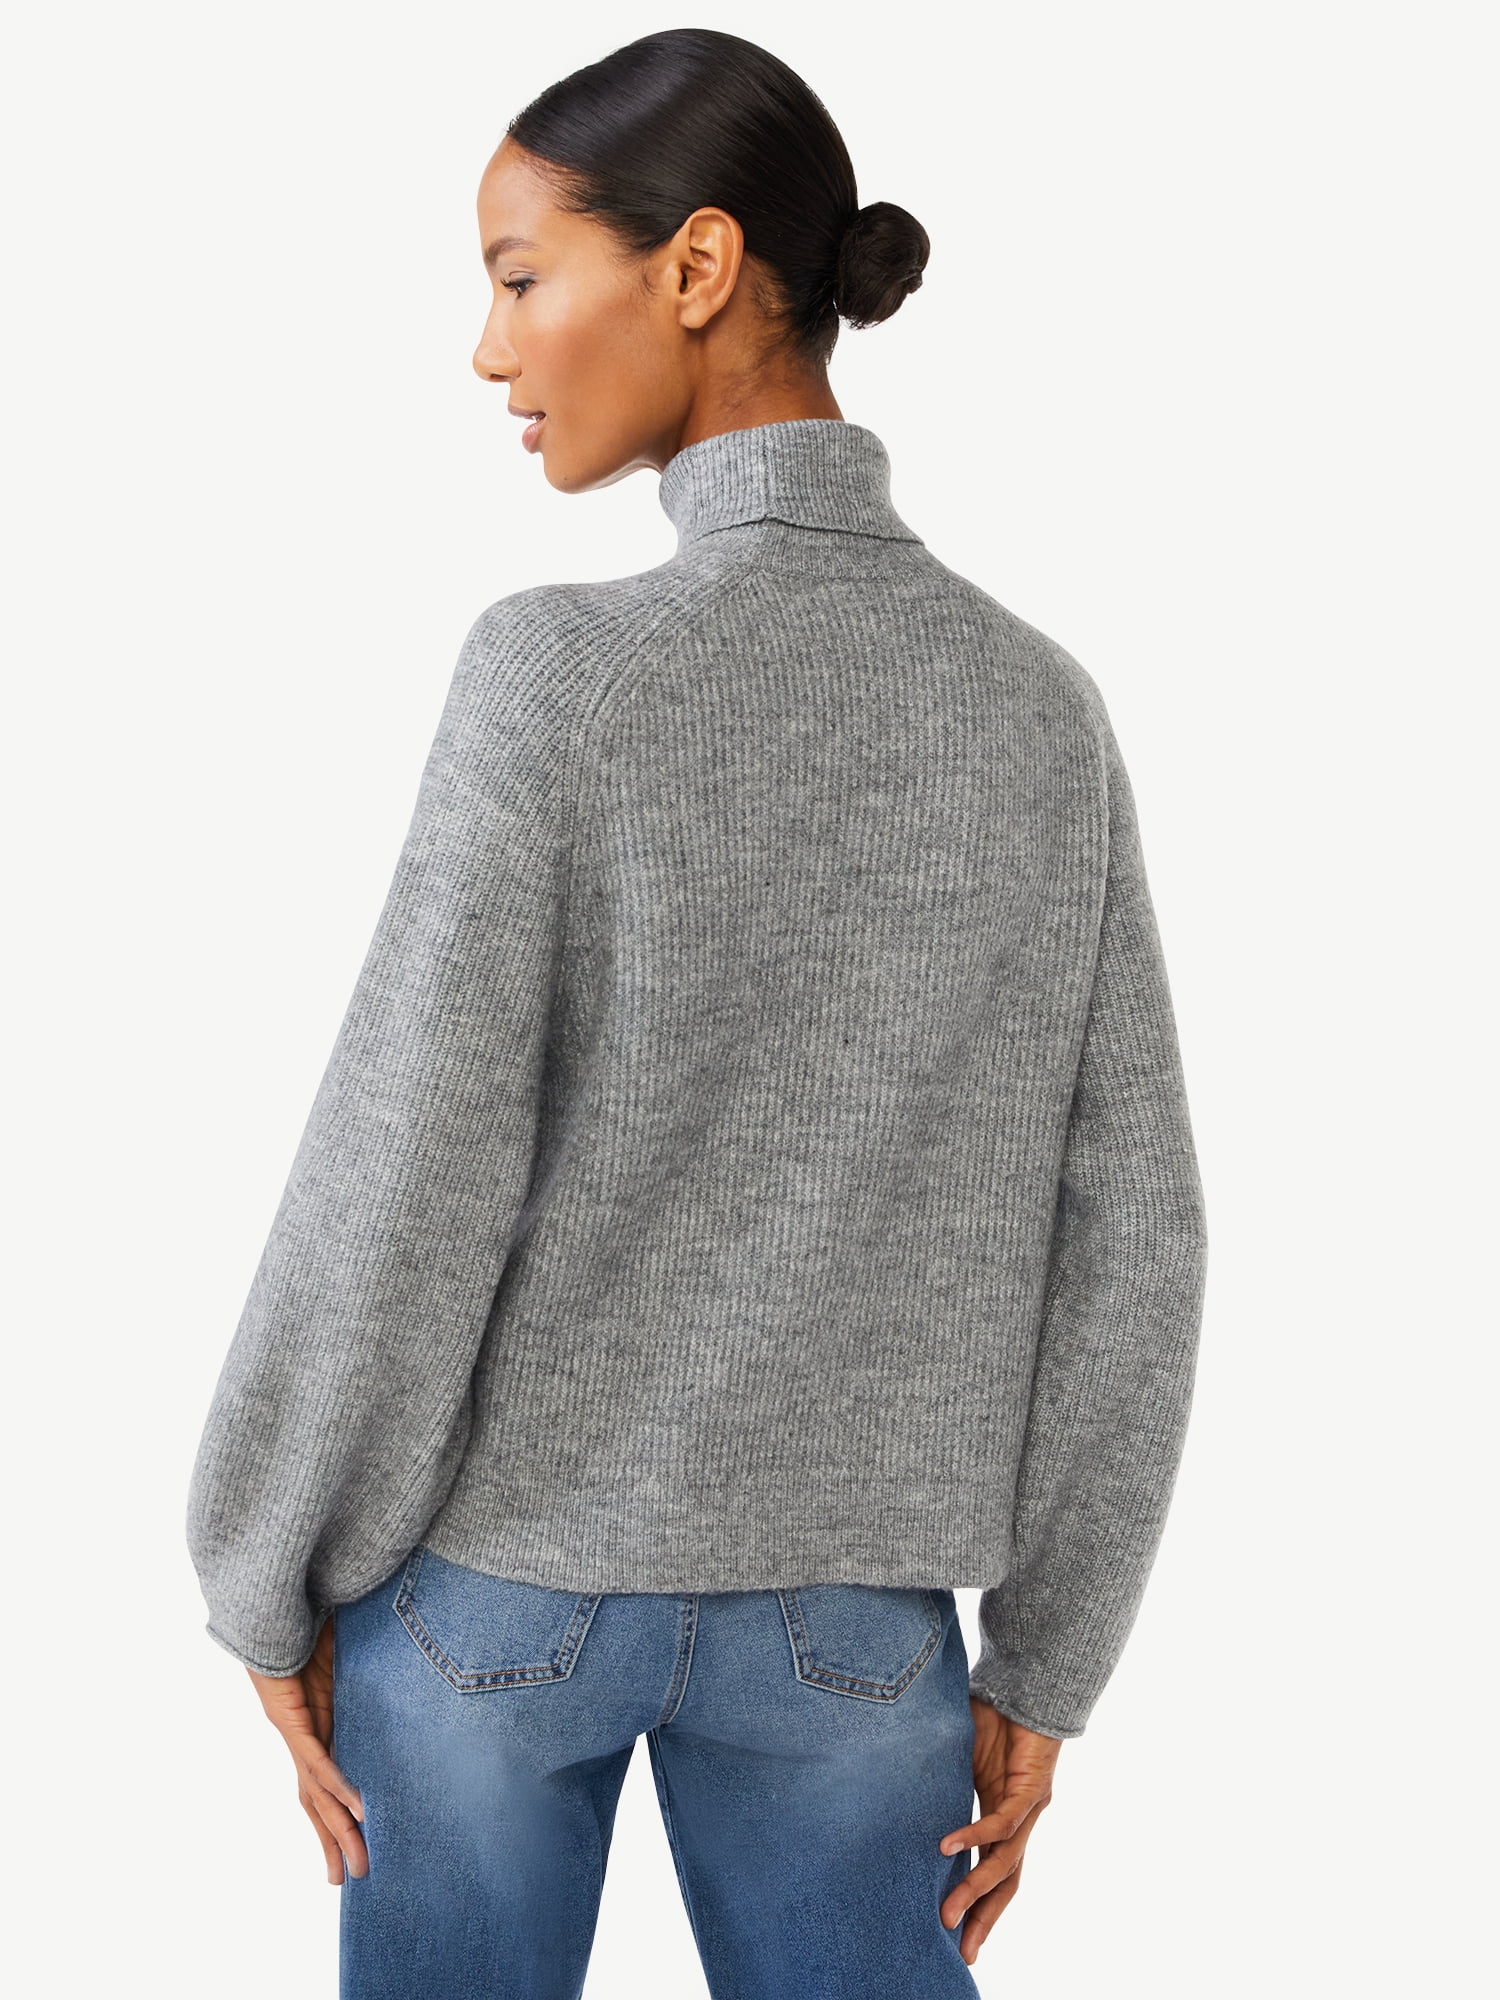 Scoop Women's Ribbed Oversized Turtleneck Sweater with Long